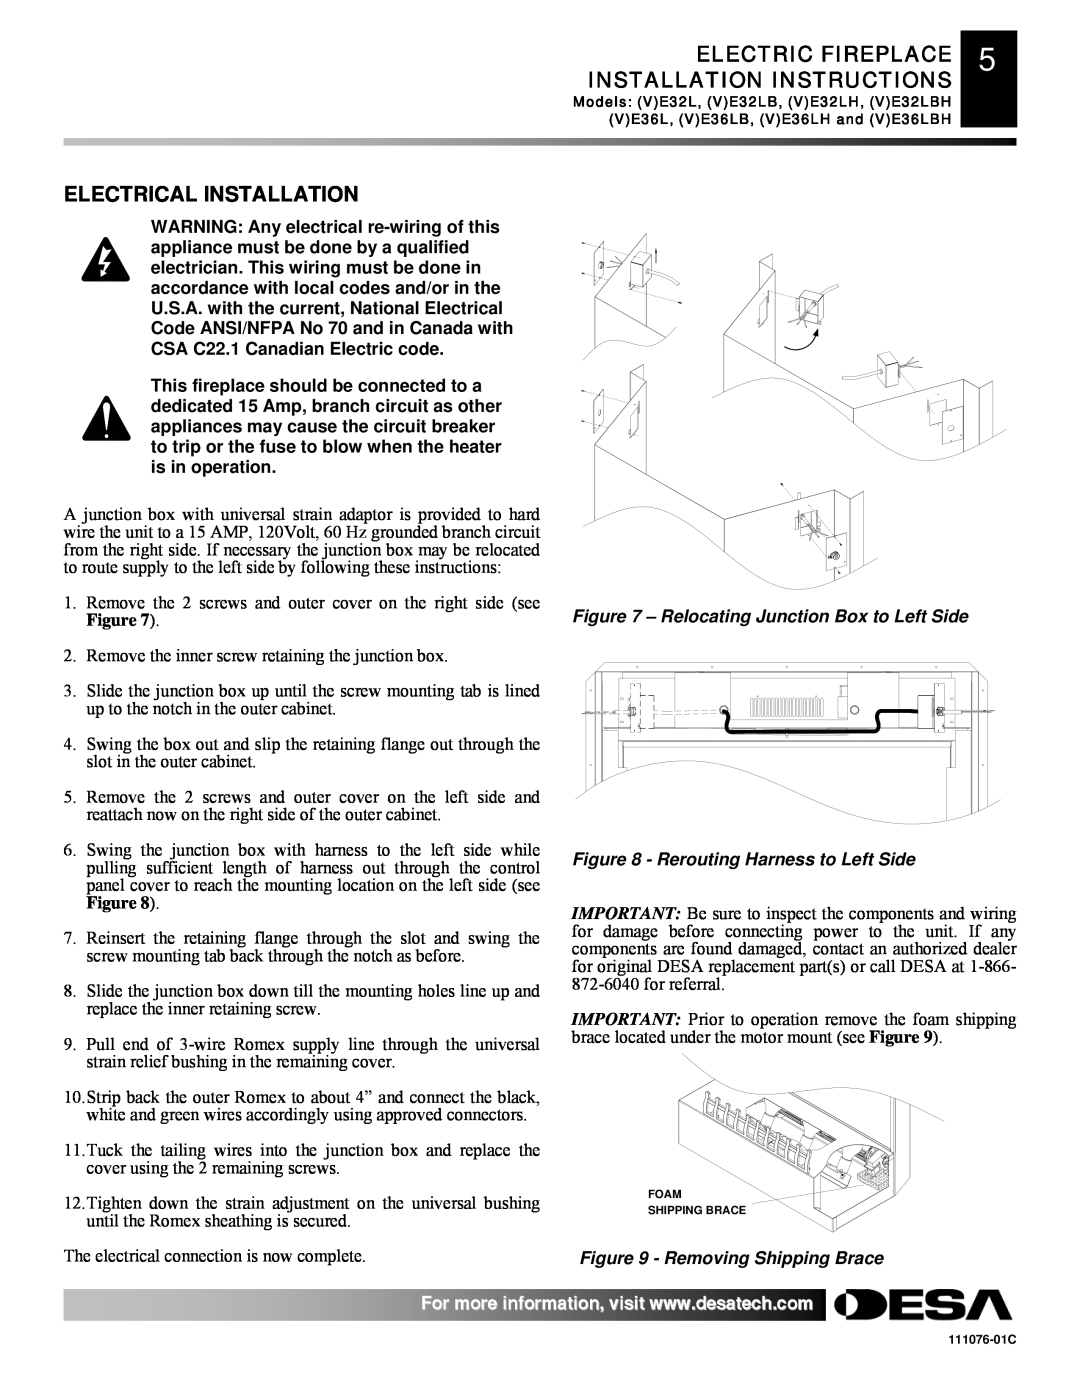 Desa E36(L)(B)(H) Electrical Installation, ELECTRIC FIREPLACE 5 INSTALLATION INSTRUCTIONS, Rerouting Harness to Left Side 